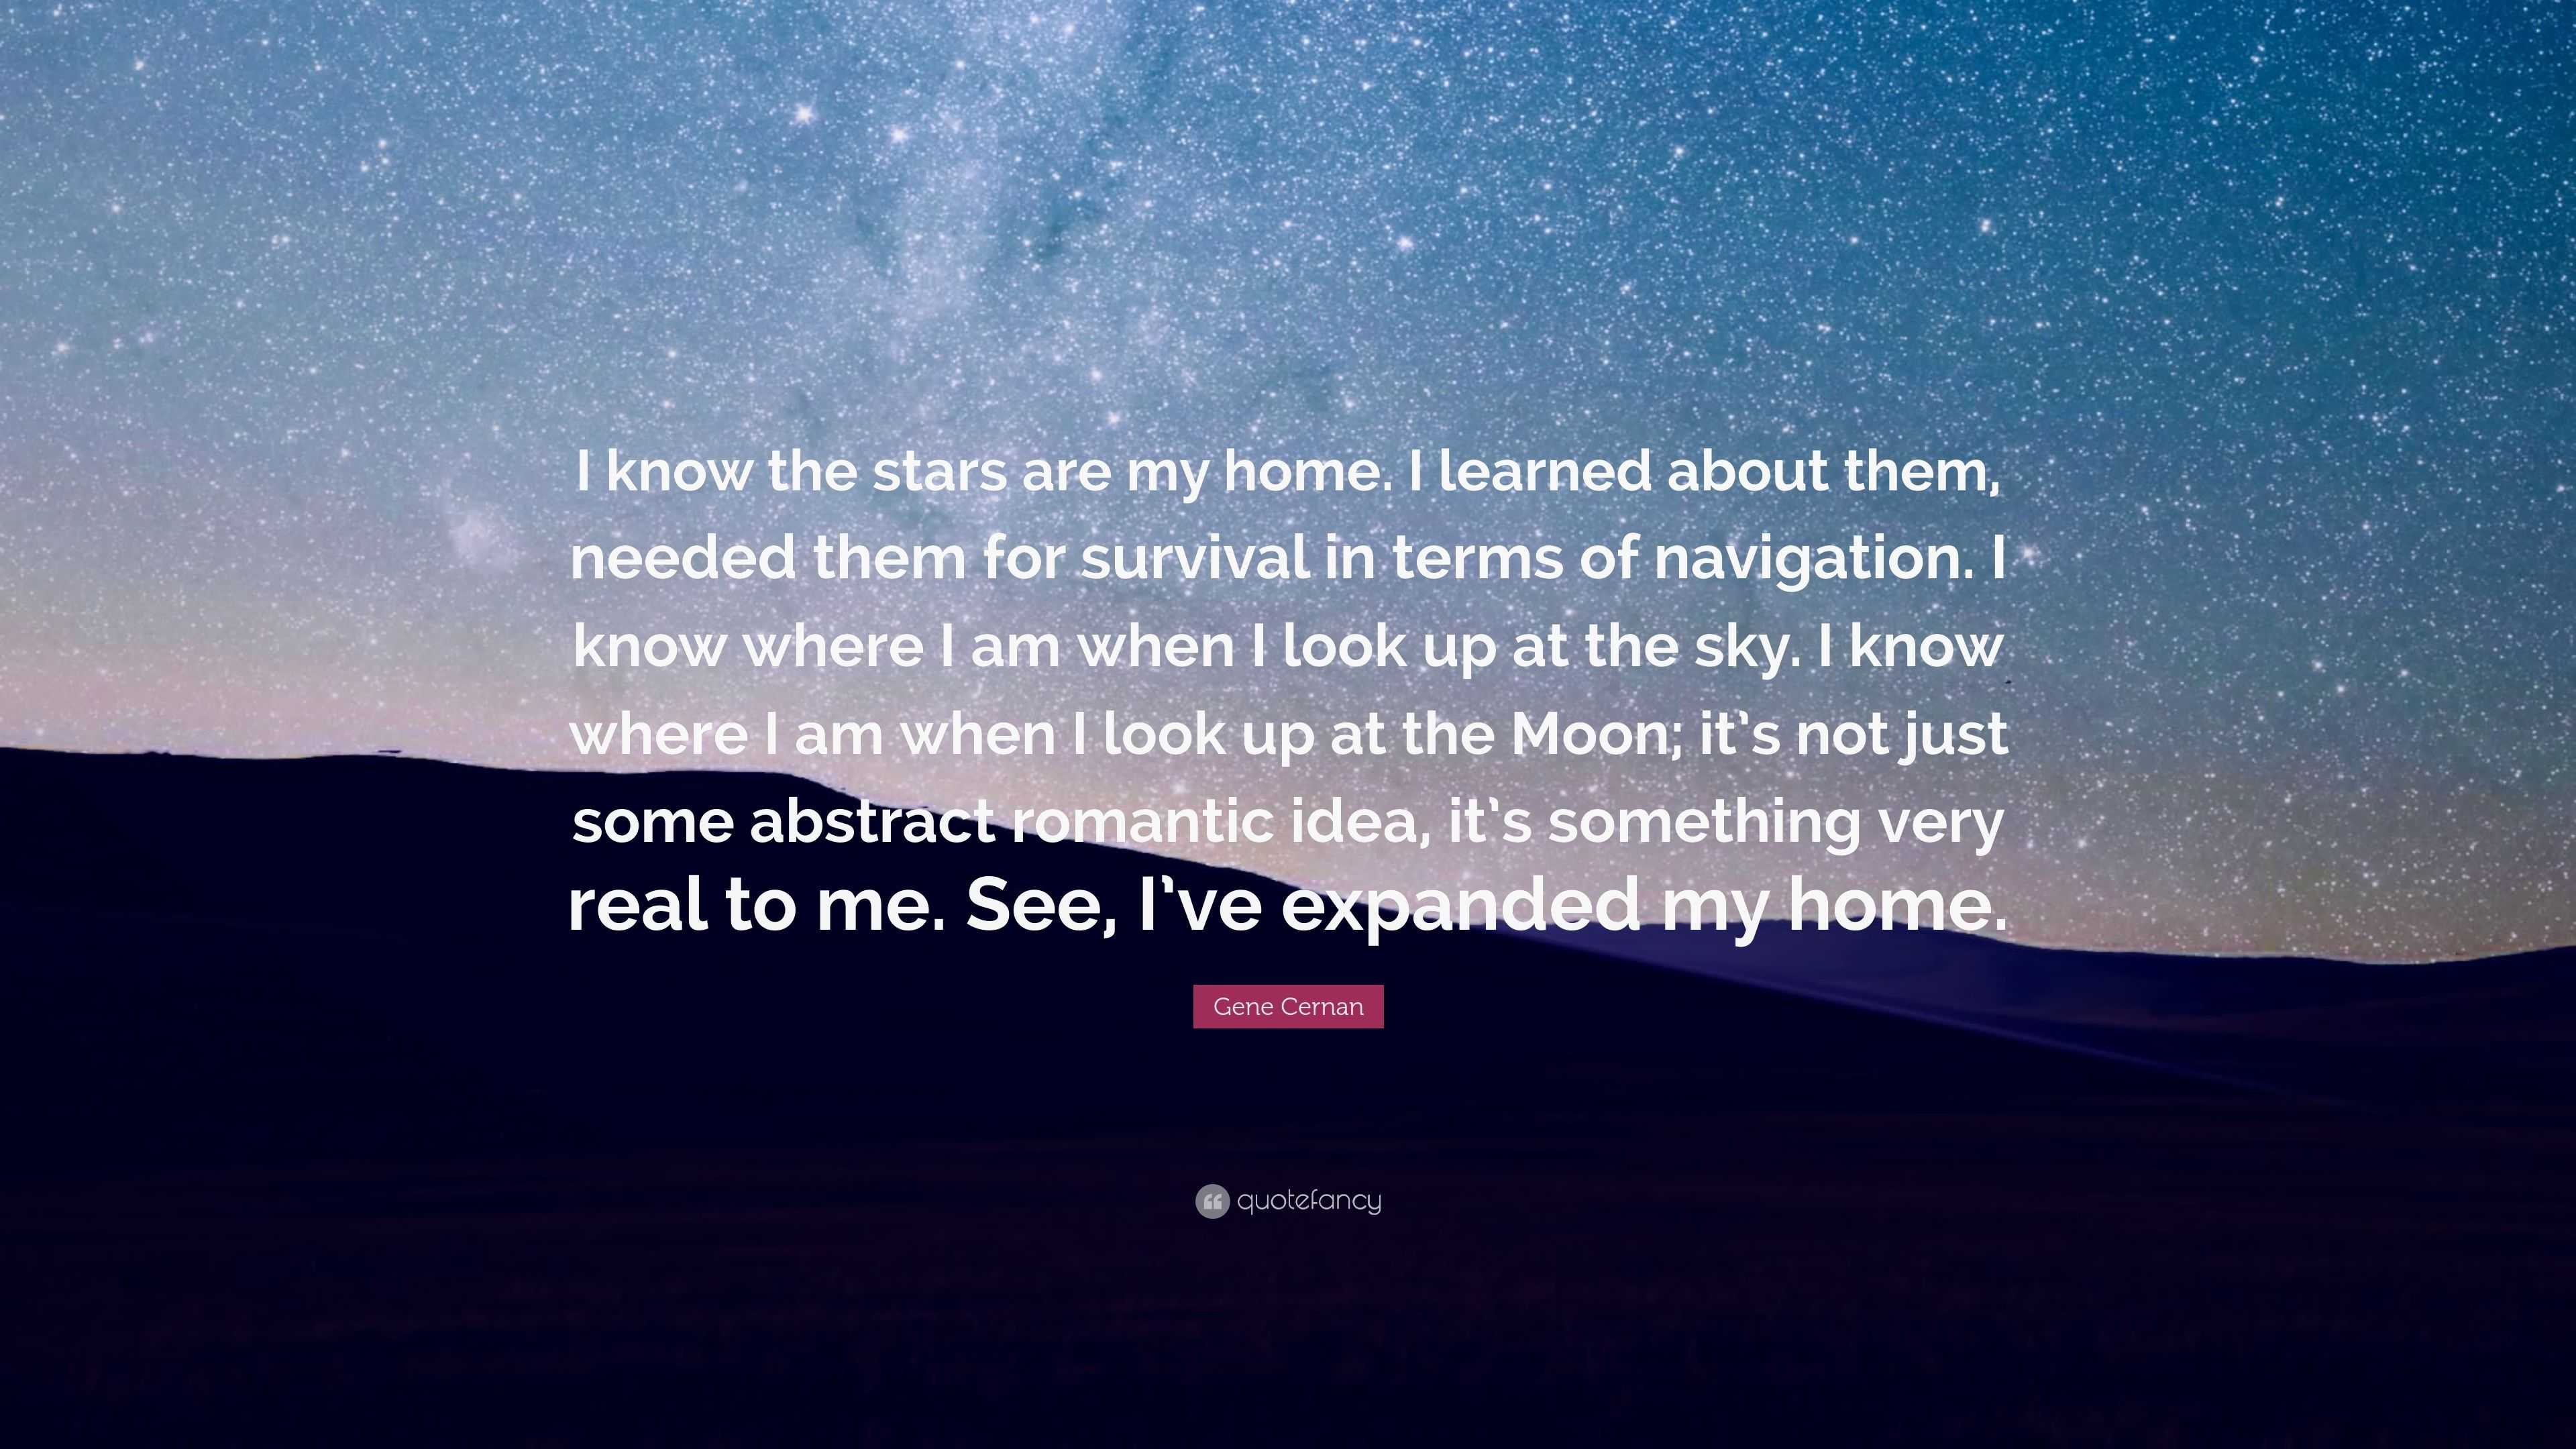 Gene Cernan Quote I Know The Stars Are My Home I Learned About Them Needed Them For Survival In Terms Of Navigation I Know Where I Am W 9 Wallpapers Quotefancy